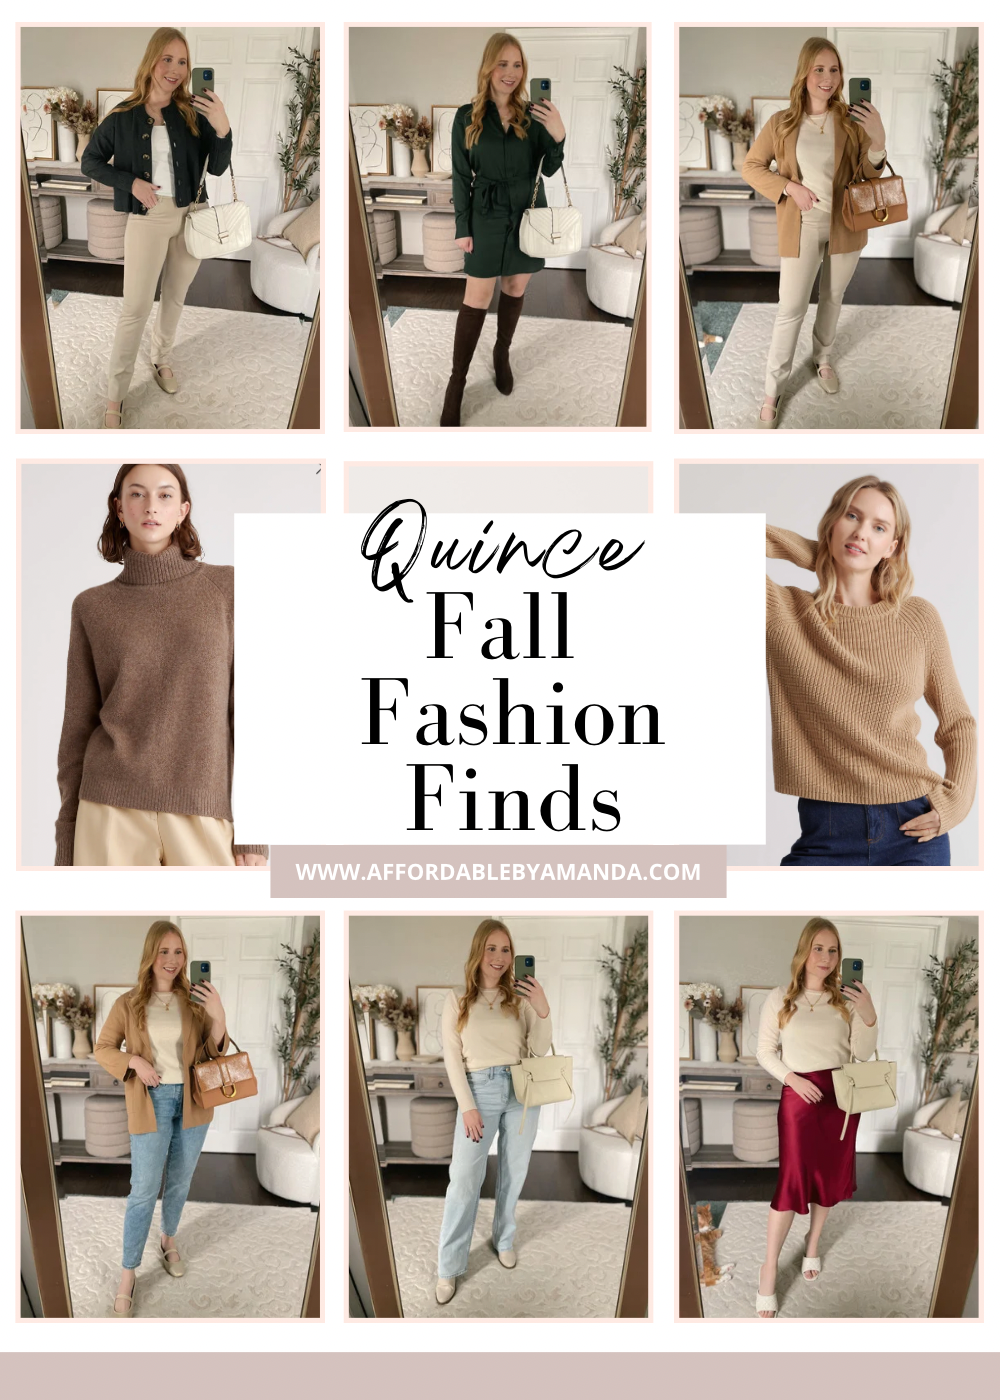 Quince Fall Fashion Finds - Affordable by Amanda